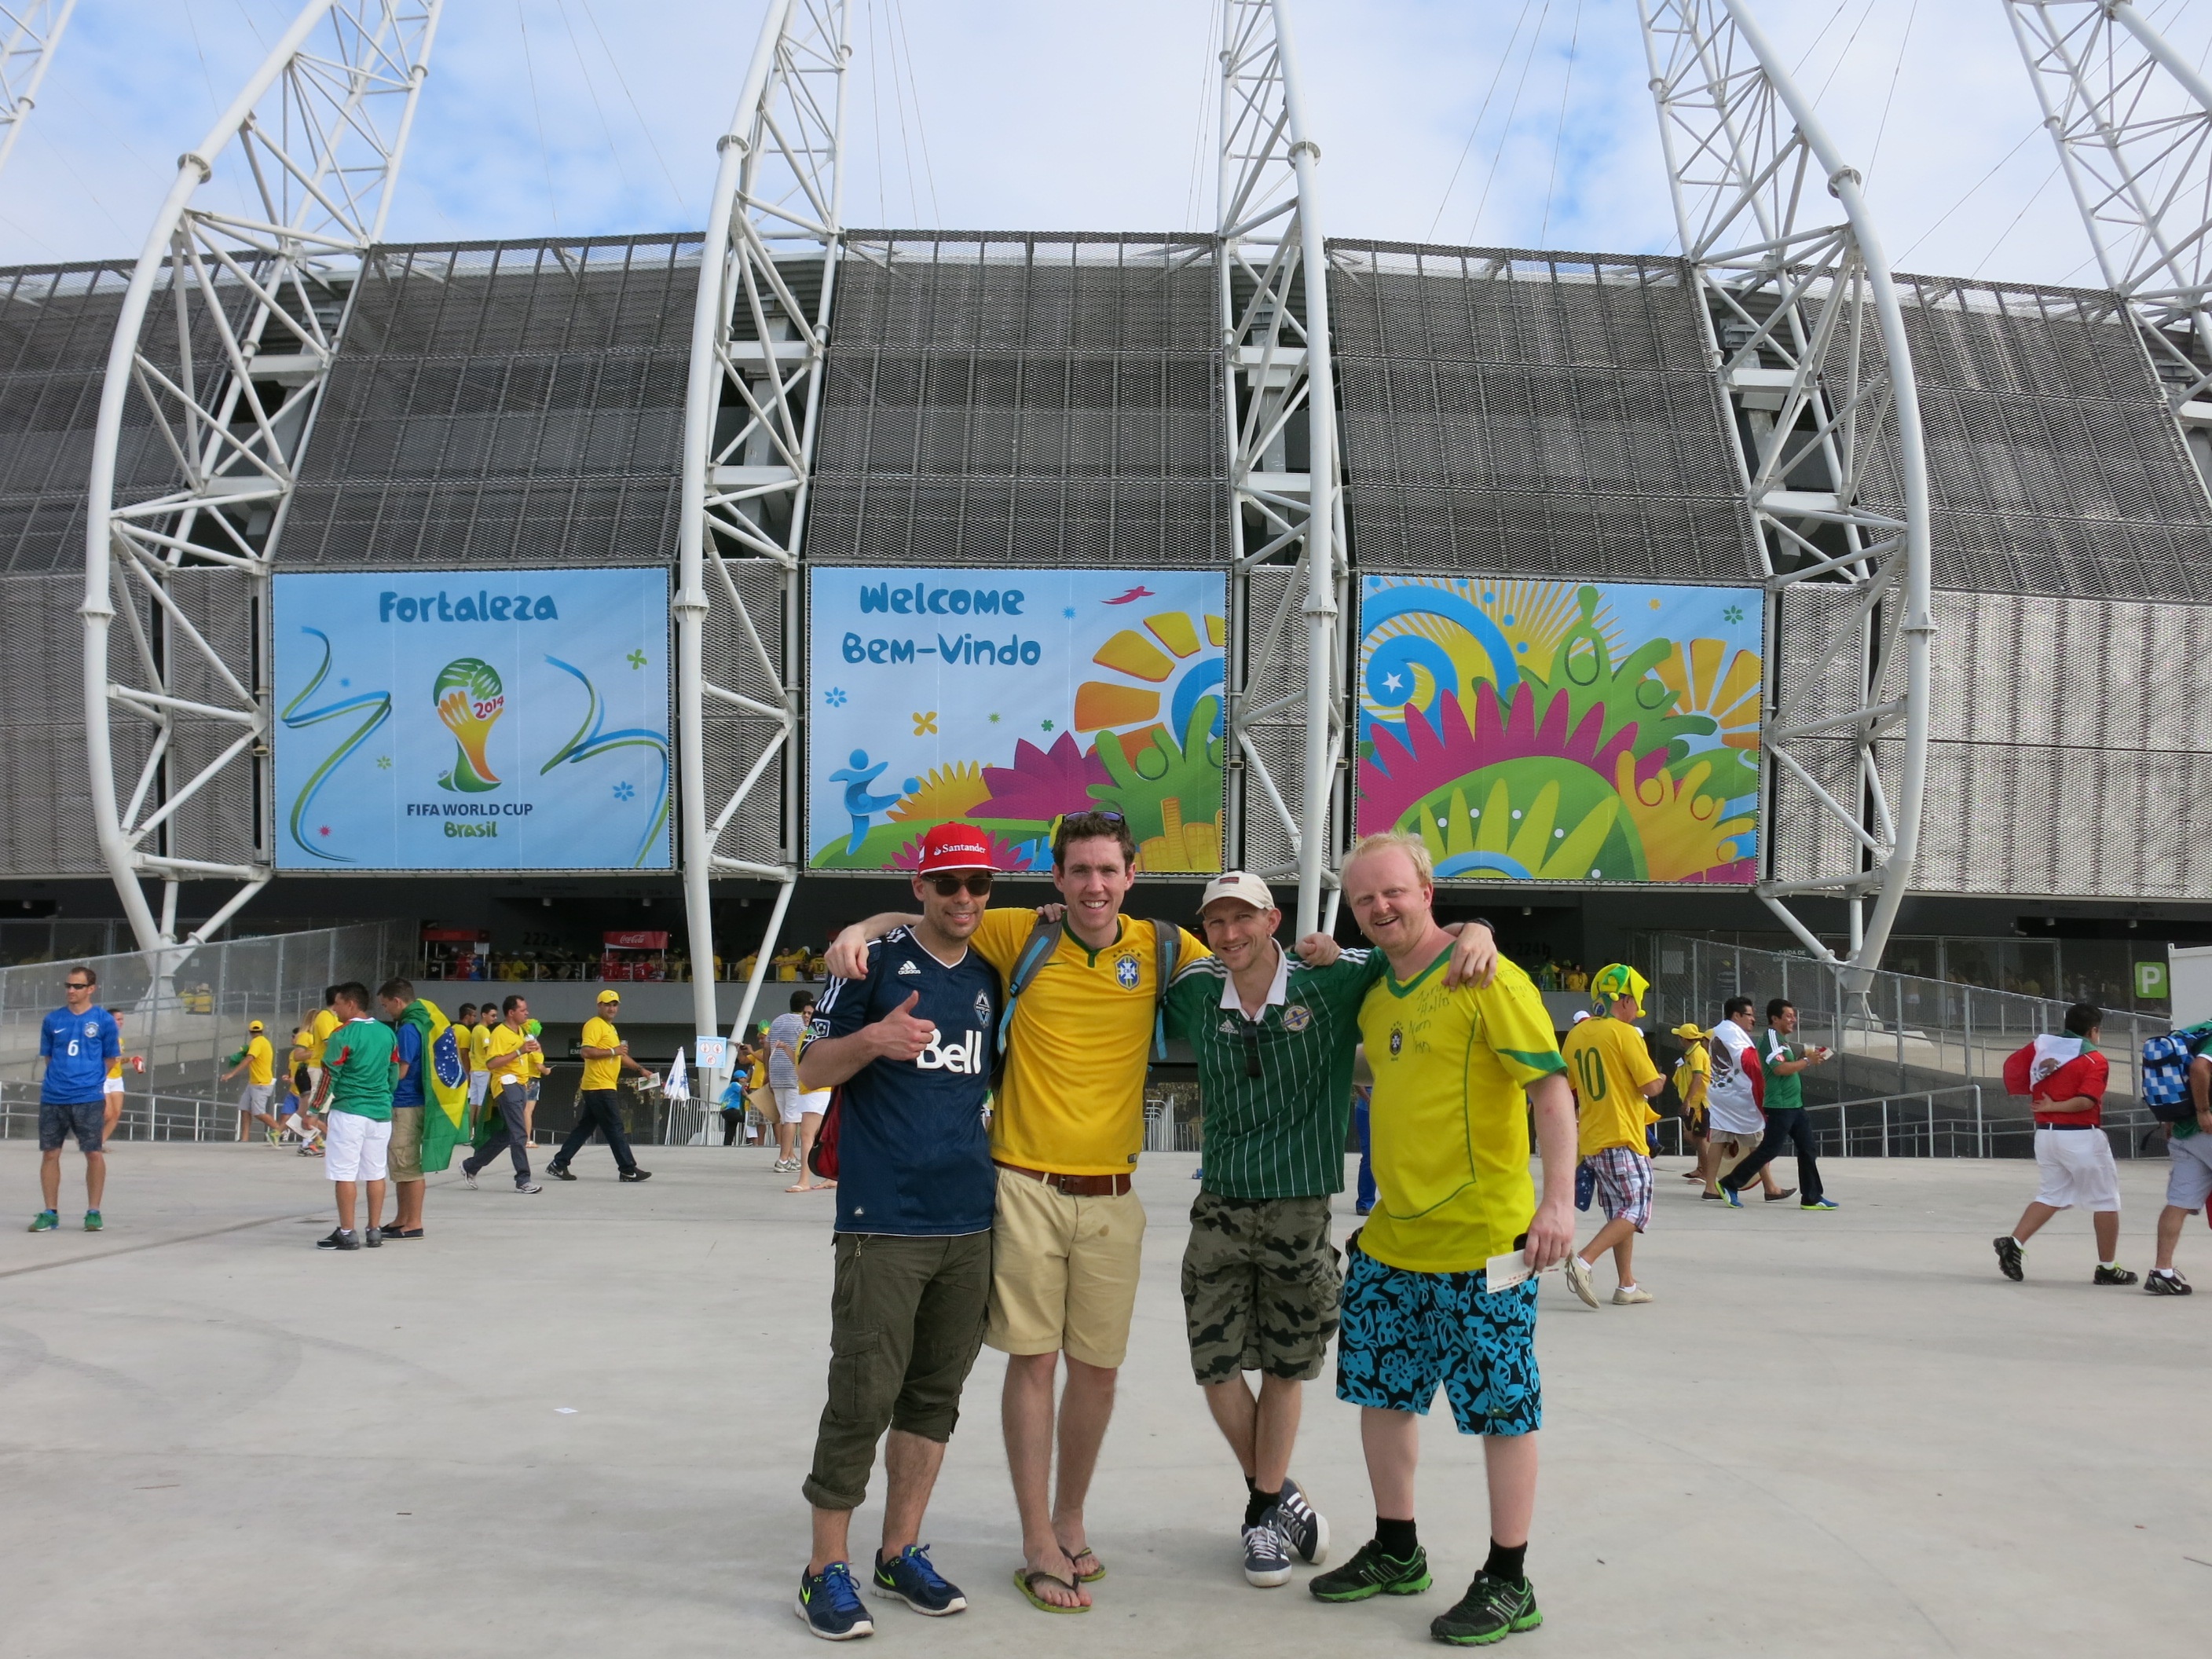 blogging about the FIFA world cup in Brazil